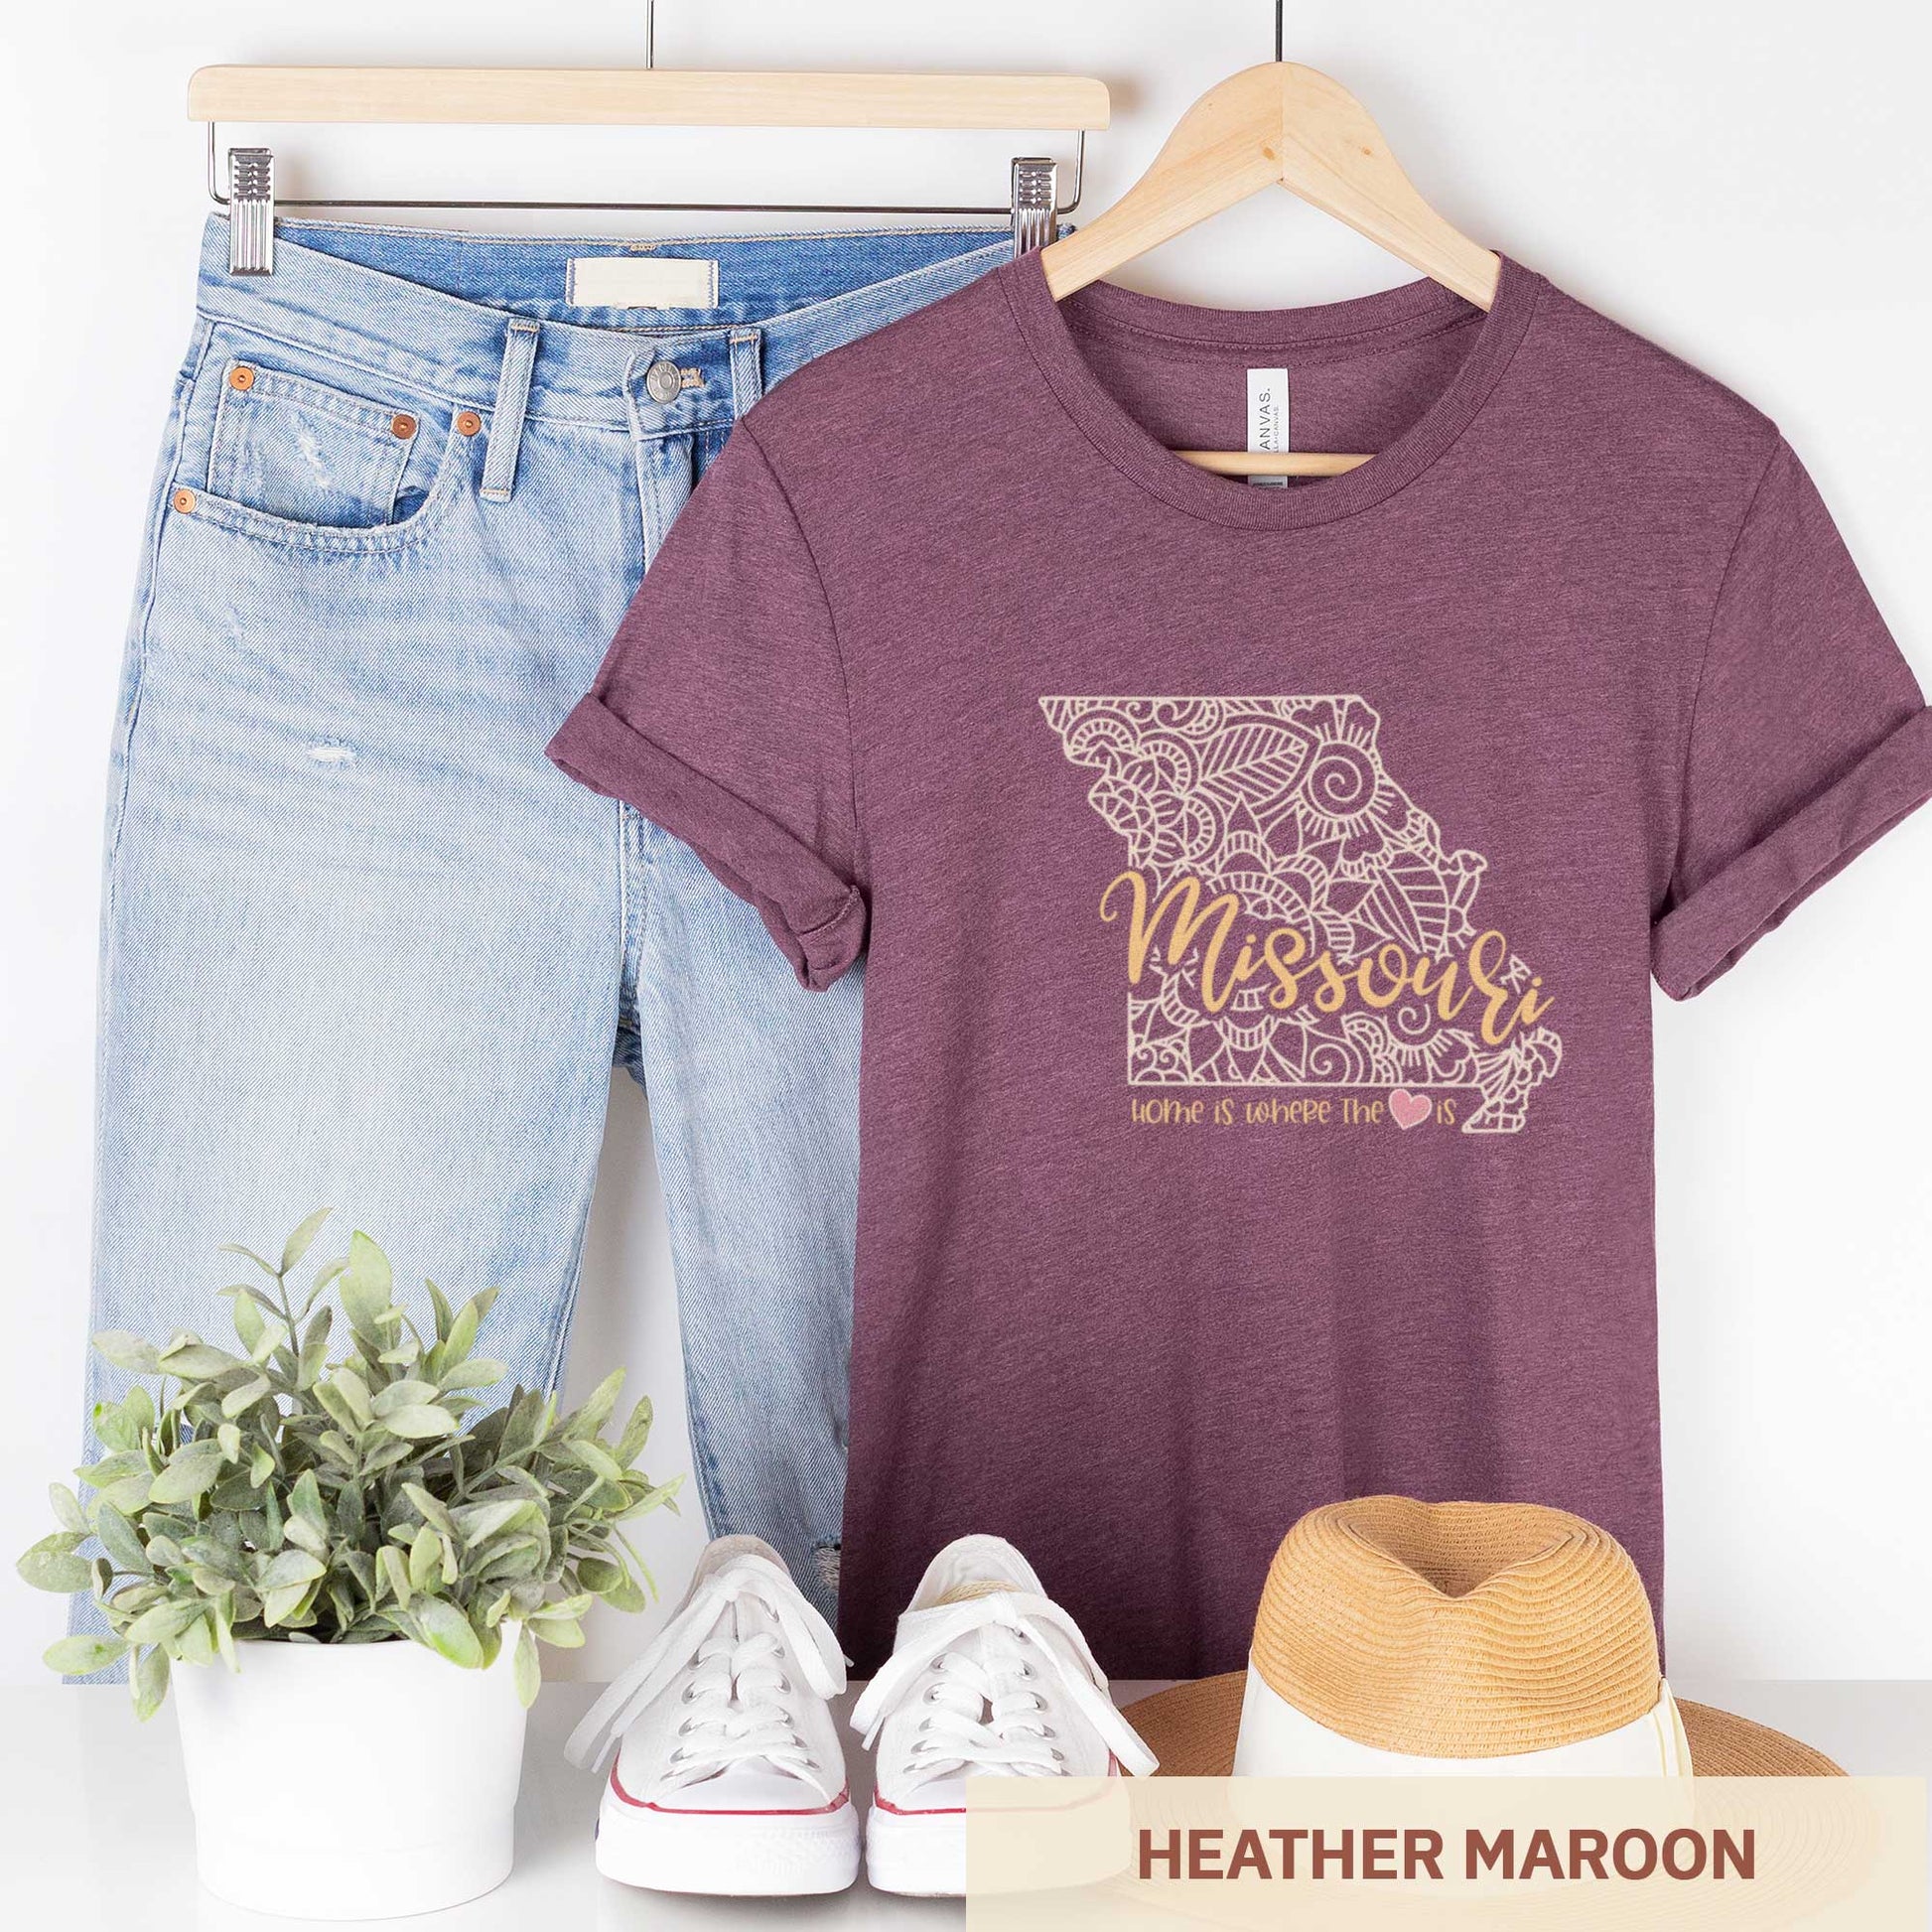 A hanging heather maroon Bella Canvas t-shirt featuring a mandala in the shape of Missouri with the words home is where the heart is.